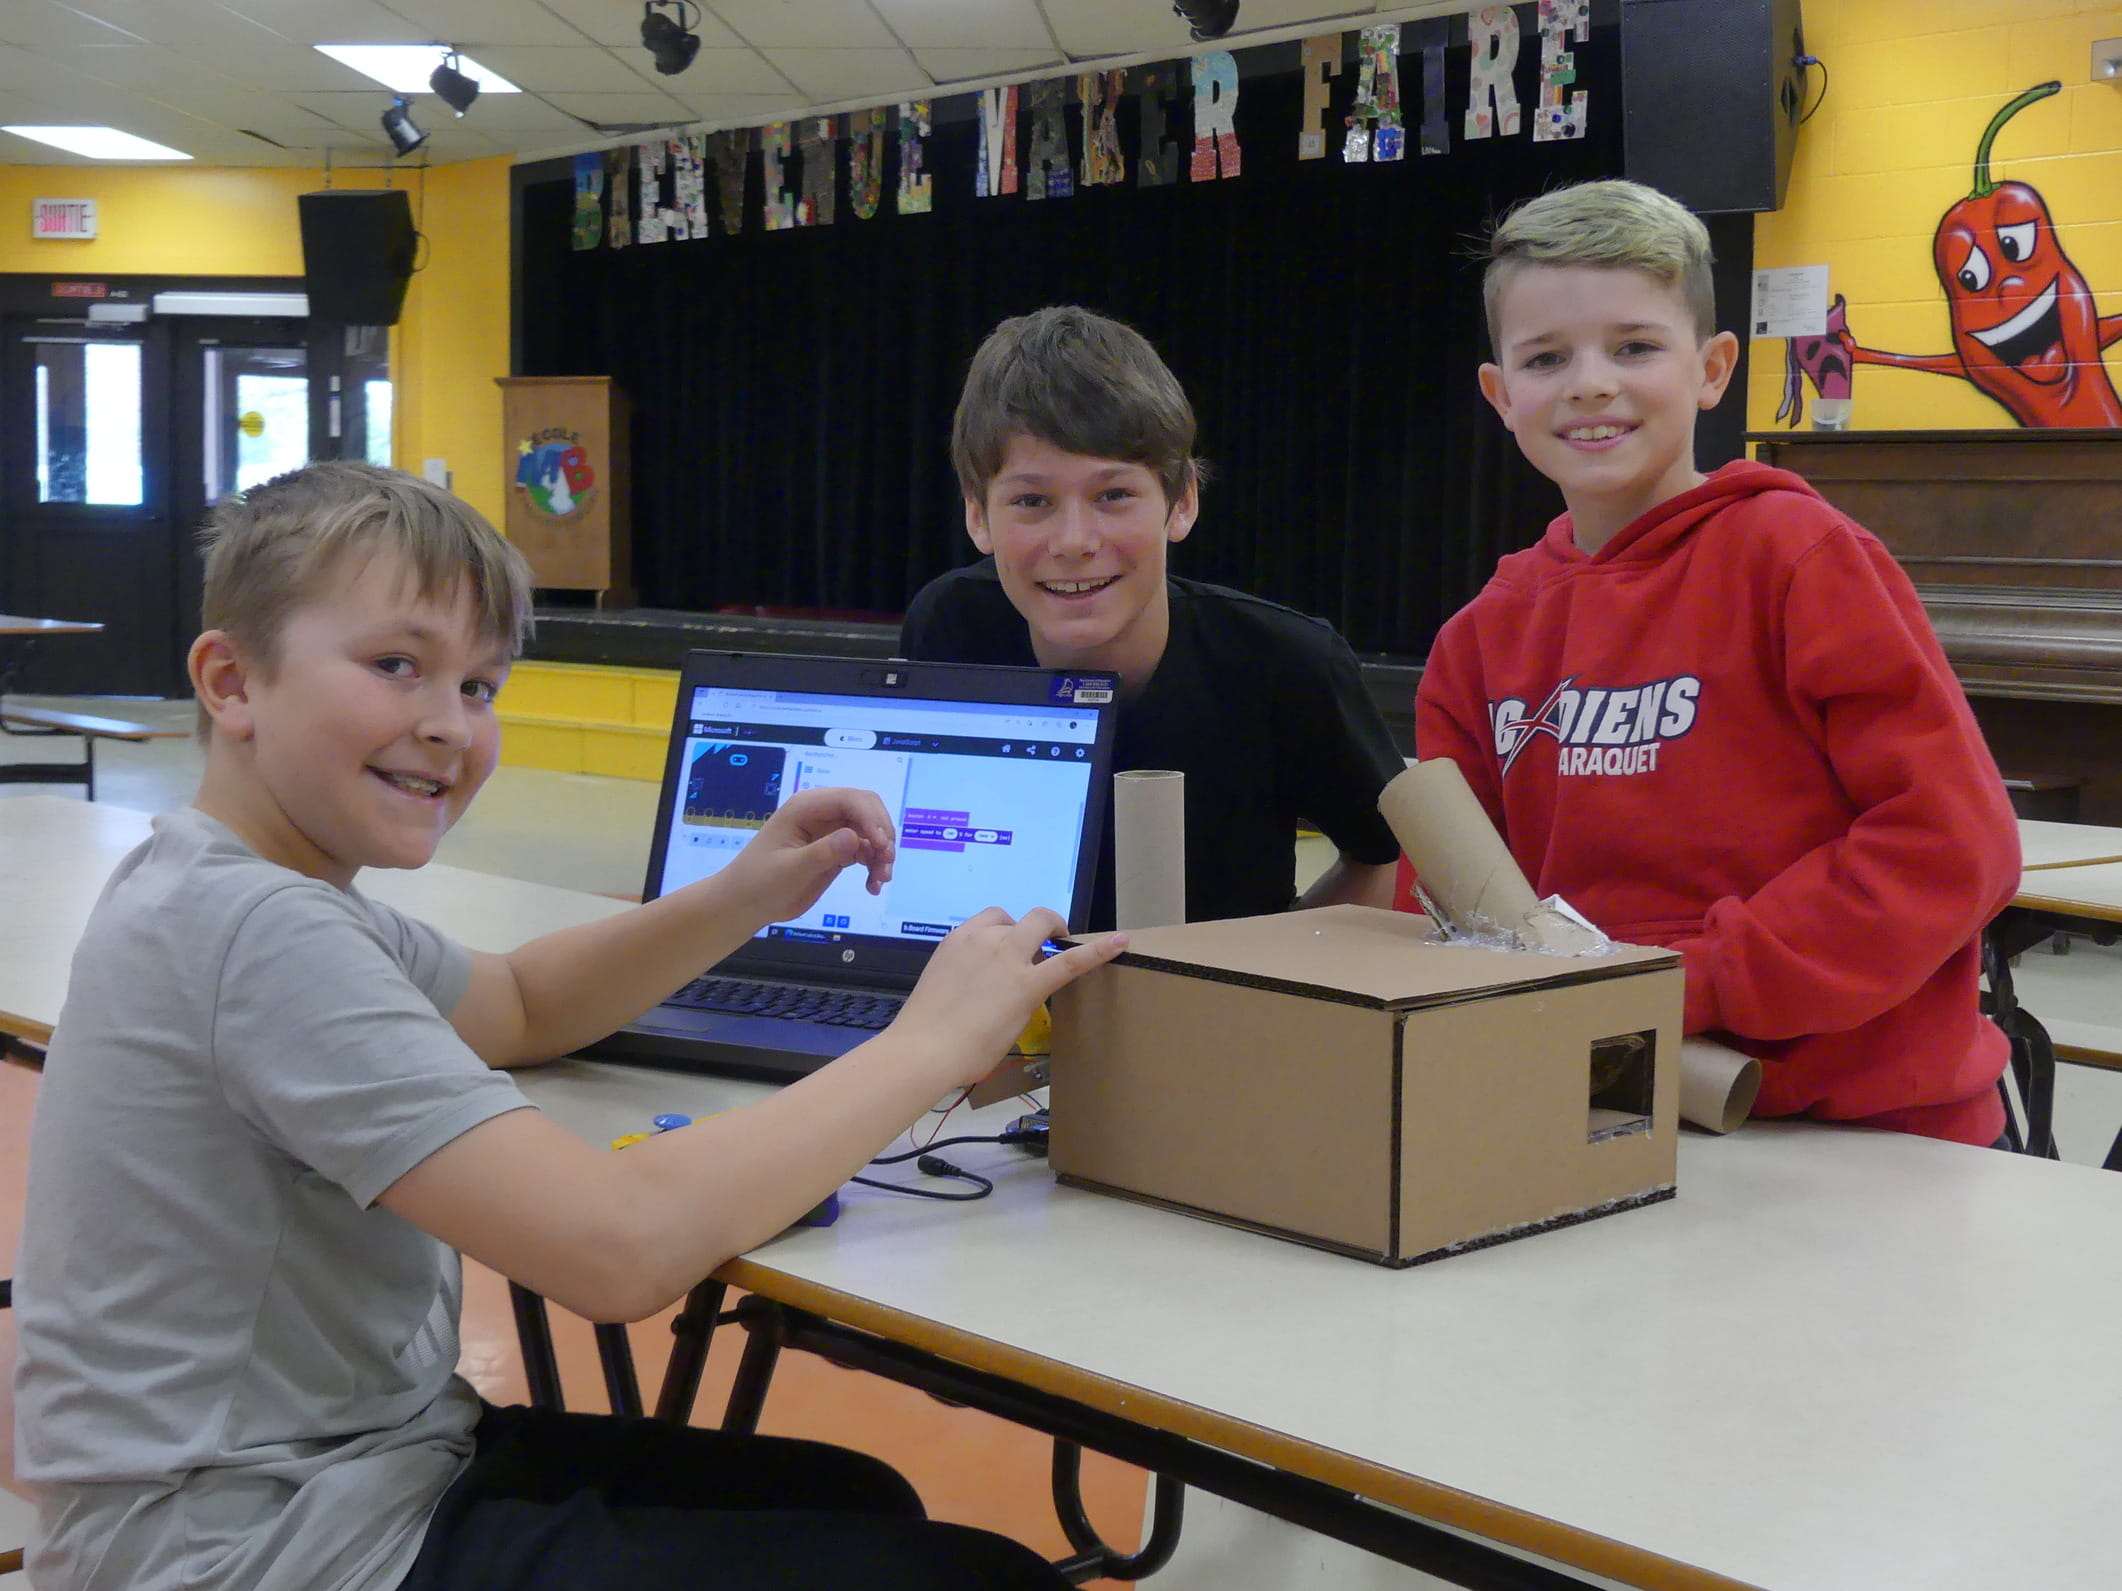 Youth working on a scratch project with cardboard